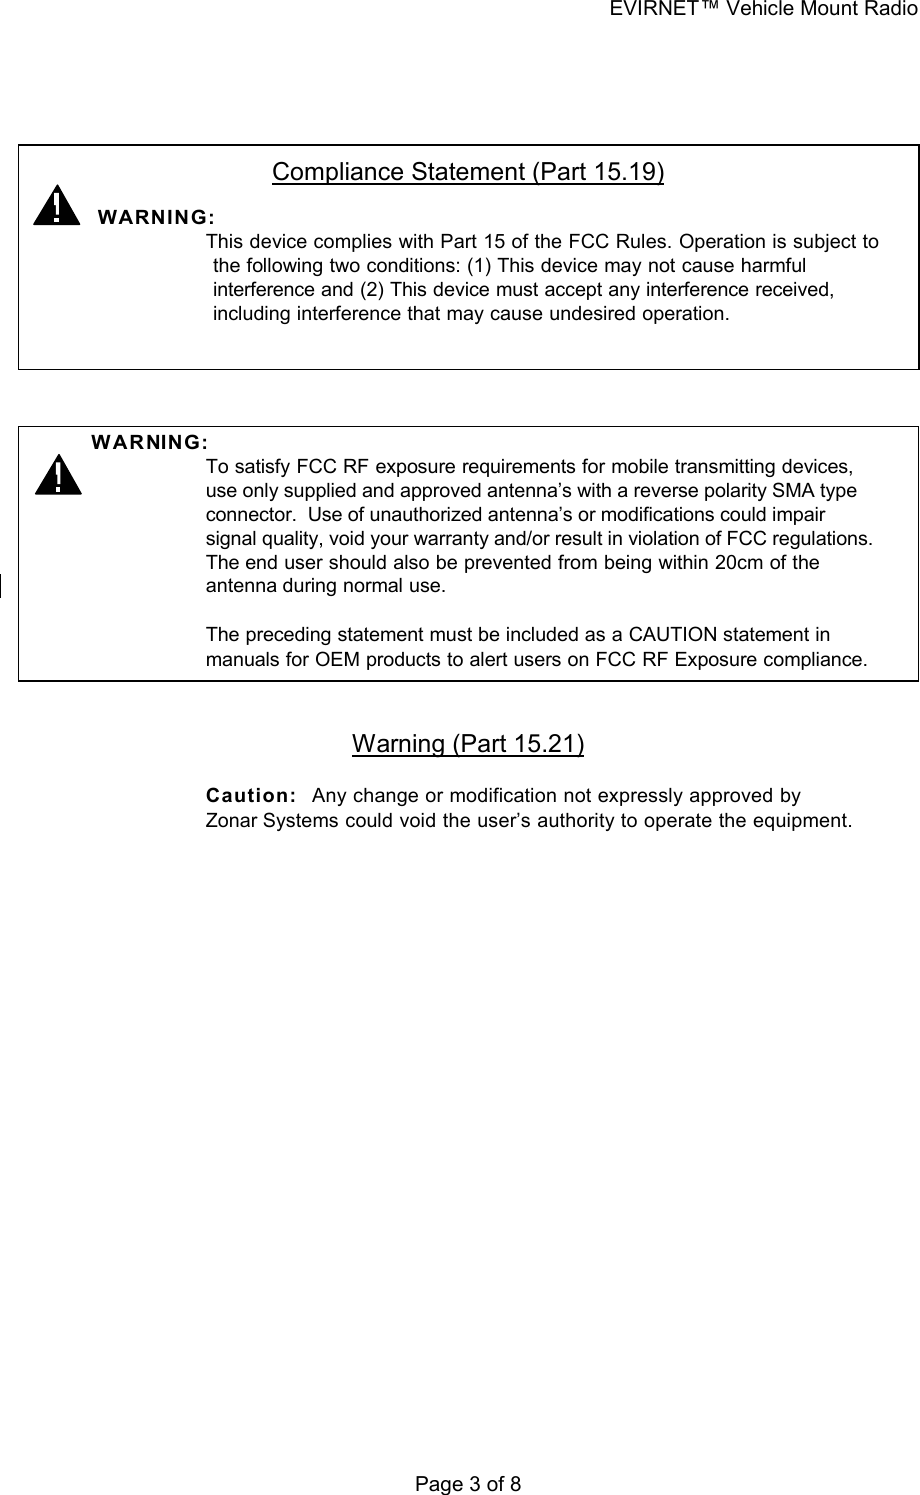 EVIRNET™ Vehicle Mount Radio Page 3 of 8    Compliance Statement (Part 15.19)   WARNING:    This device complies with Part 15 of the FCC Rules. Operation is subject to the following two conditions: (1) This device may not cause harmful interference and (2) This device must accept any interference received, including interference that may cause undesired operation.     WA RNING:    To satisfy FCC RF exposure requirements for mobile transmitting devices, use only supplied and approved antenna’s with a reverse polarity SMA type connector.  Use of unauthorized antenna’s or modifications could impair signal quality, void your warranty and/or result in violation of FCC regulations.  The end user should also be prevented from being within 20cm of the antenna during normal use.  The preceding statement must be included as a CAUTION statement in manuals for OEM products to alert users on FCC RF Exposure compliance.   Warning (Part 15.21)  Caution:   Any change or modification not expressly approved by Zonar Systems could void the user’s authority to operate the equipment. 